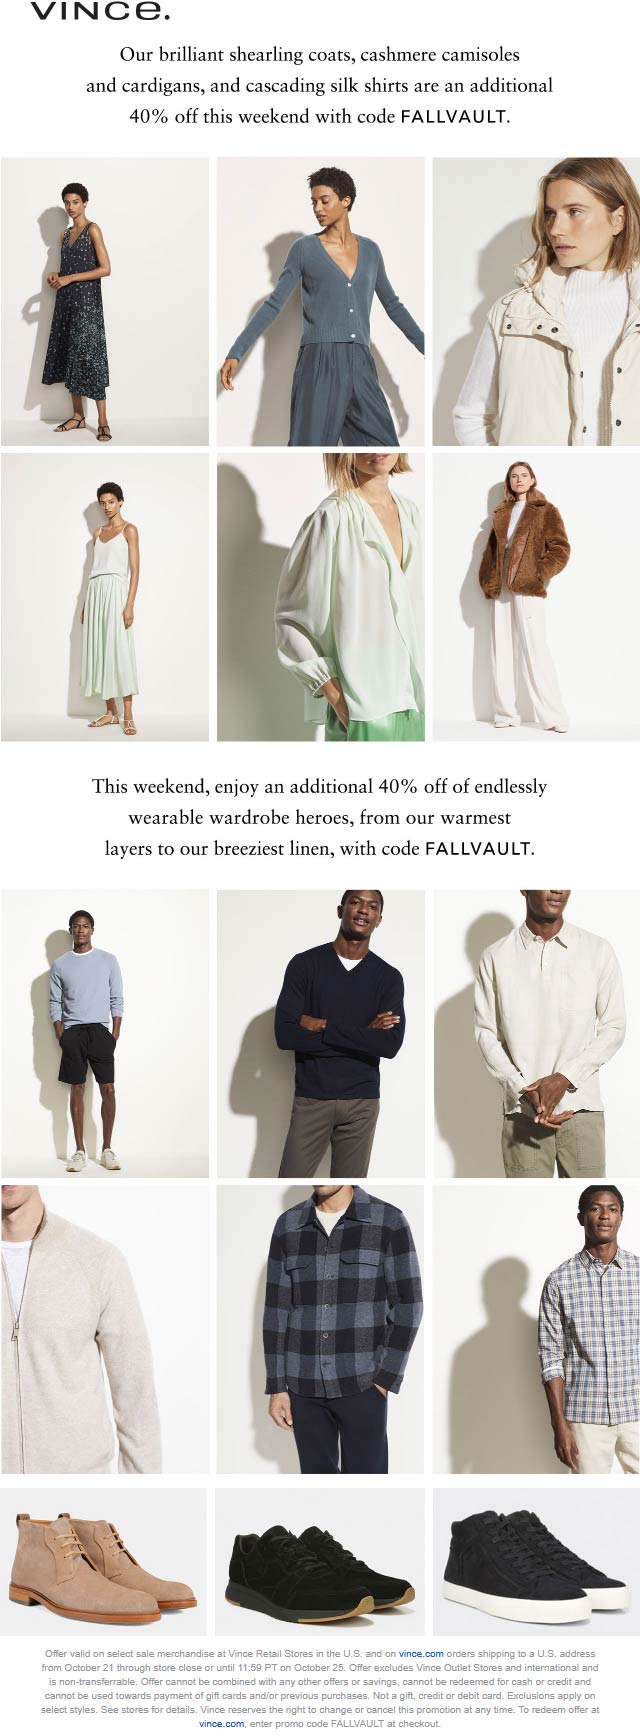 Vince stores Coupon  40% off sale items at Vince, or online via promo code FALLVAULT #vince 